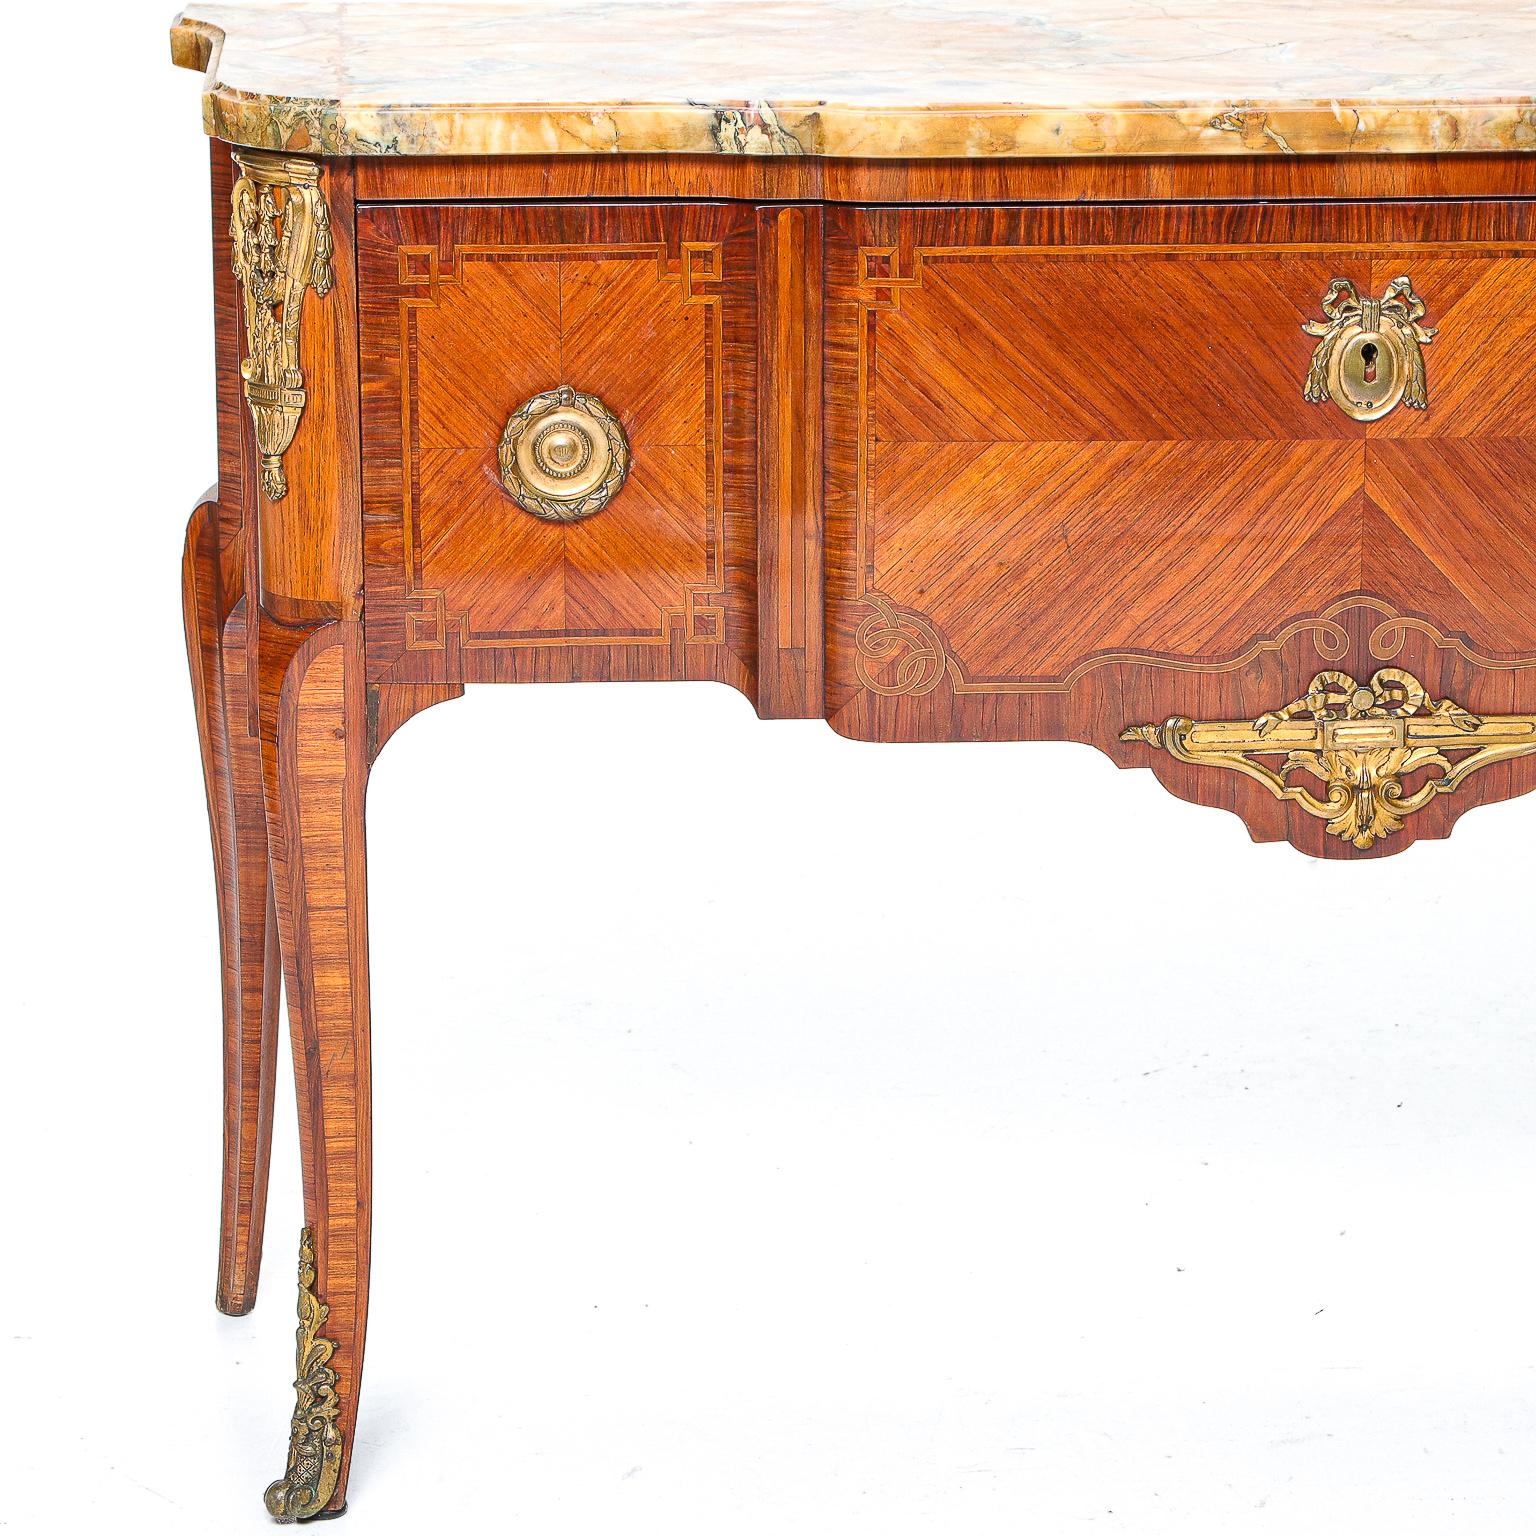 19th C. Louis XVI style marble top commode Servante with Kingwood and Tulipwood Banding, Olive Wood String Inlays in Scroll Formations, Corners Adorned with Rounded Bronze Ormolu Mounts Leading to a Tapered Inlaid Leg with Ormolu Sabot Feet,